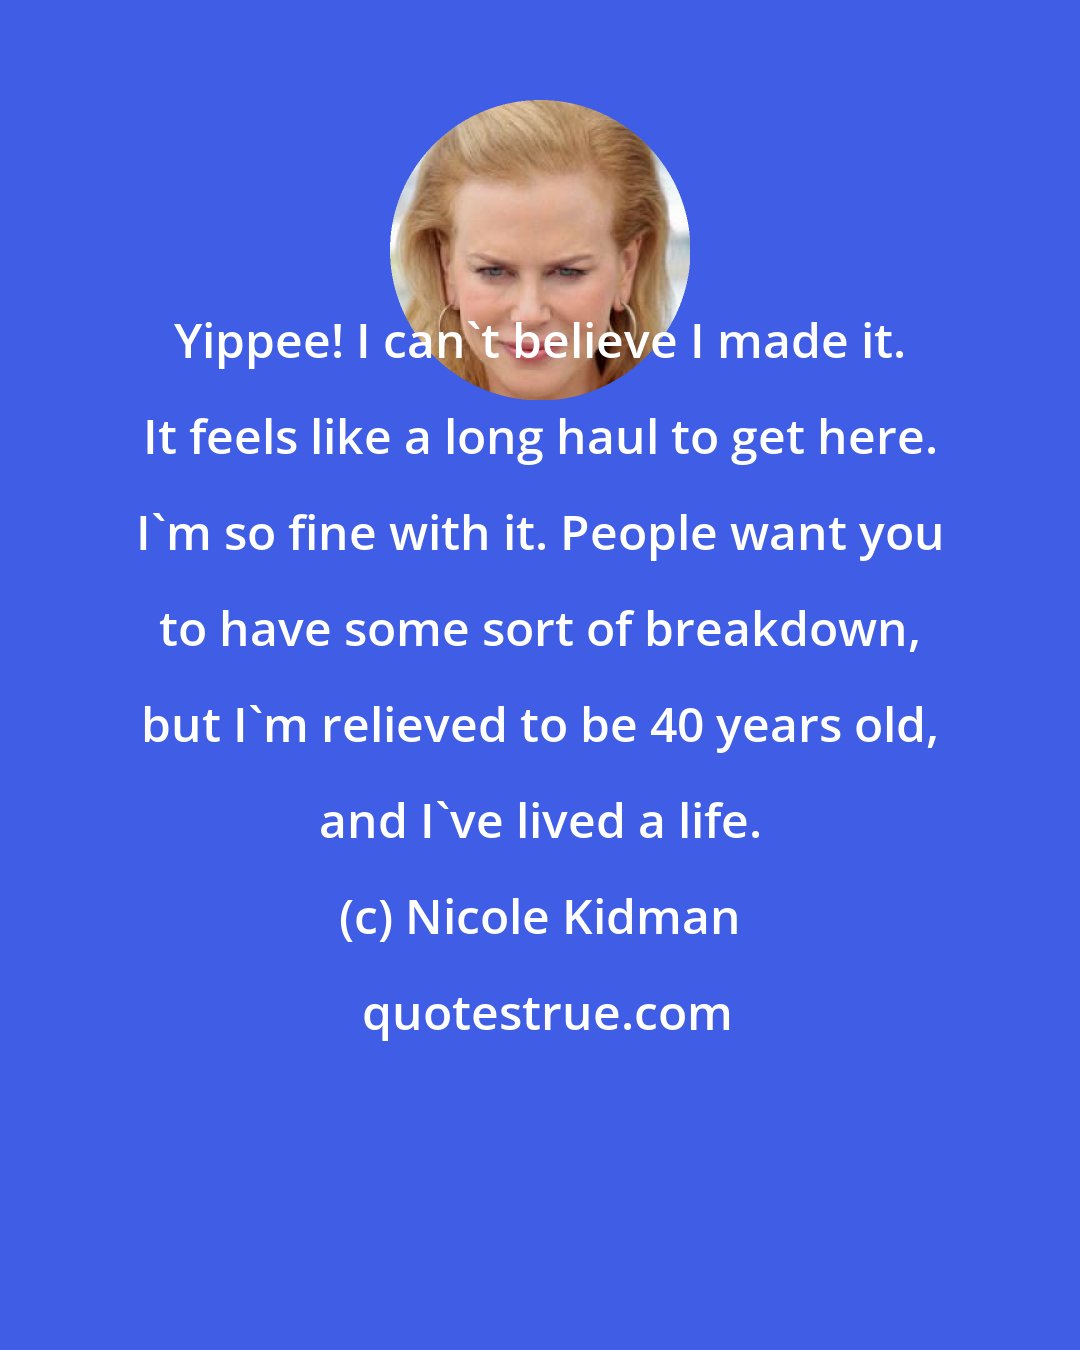 Nicole Kidman: Yippee! I can't believe I made it. It feels like a long haul to get here. I'm so fine with it. People want you to have some sort of breakdown, but I'm relieved to be 40 years old, and I've lived a life.